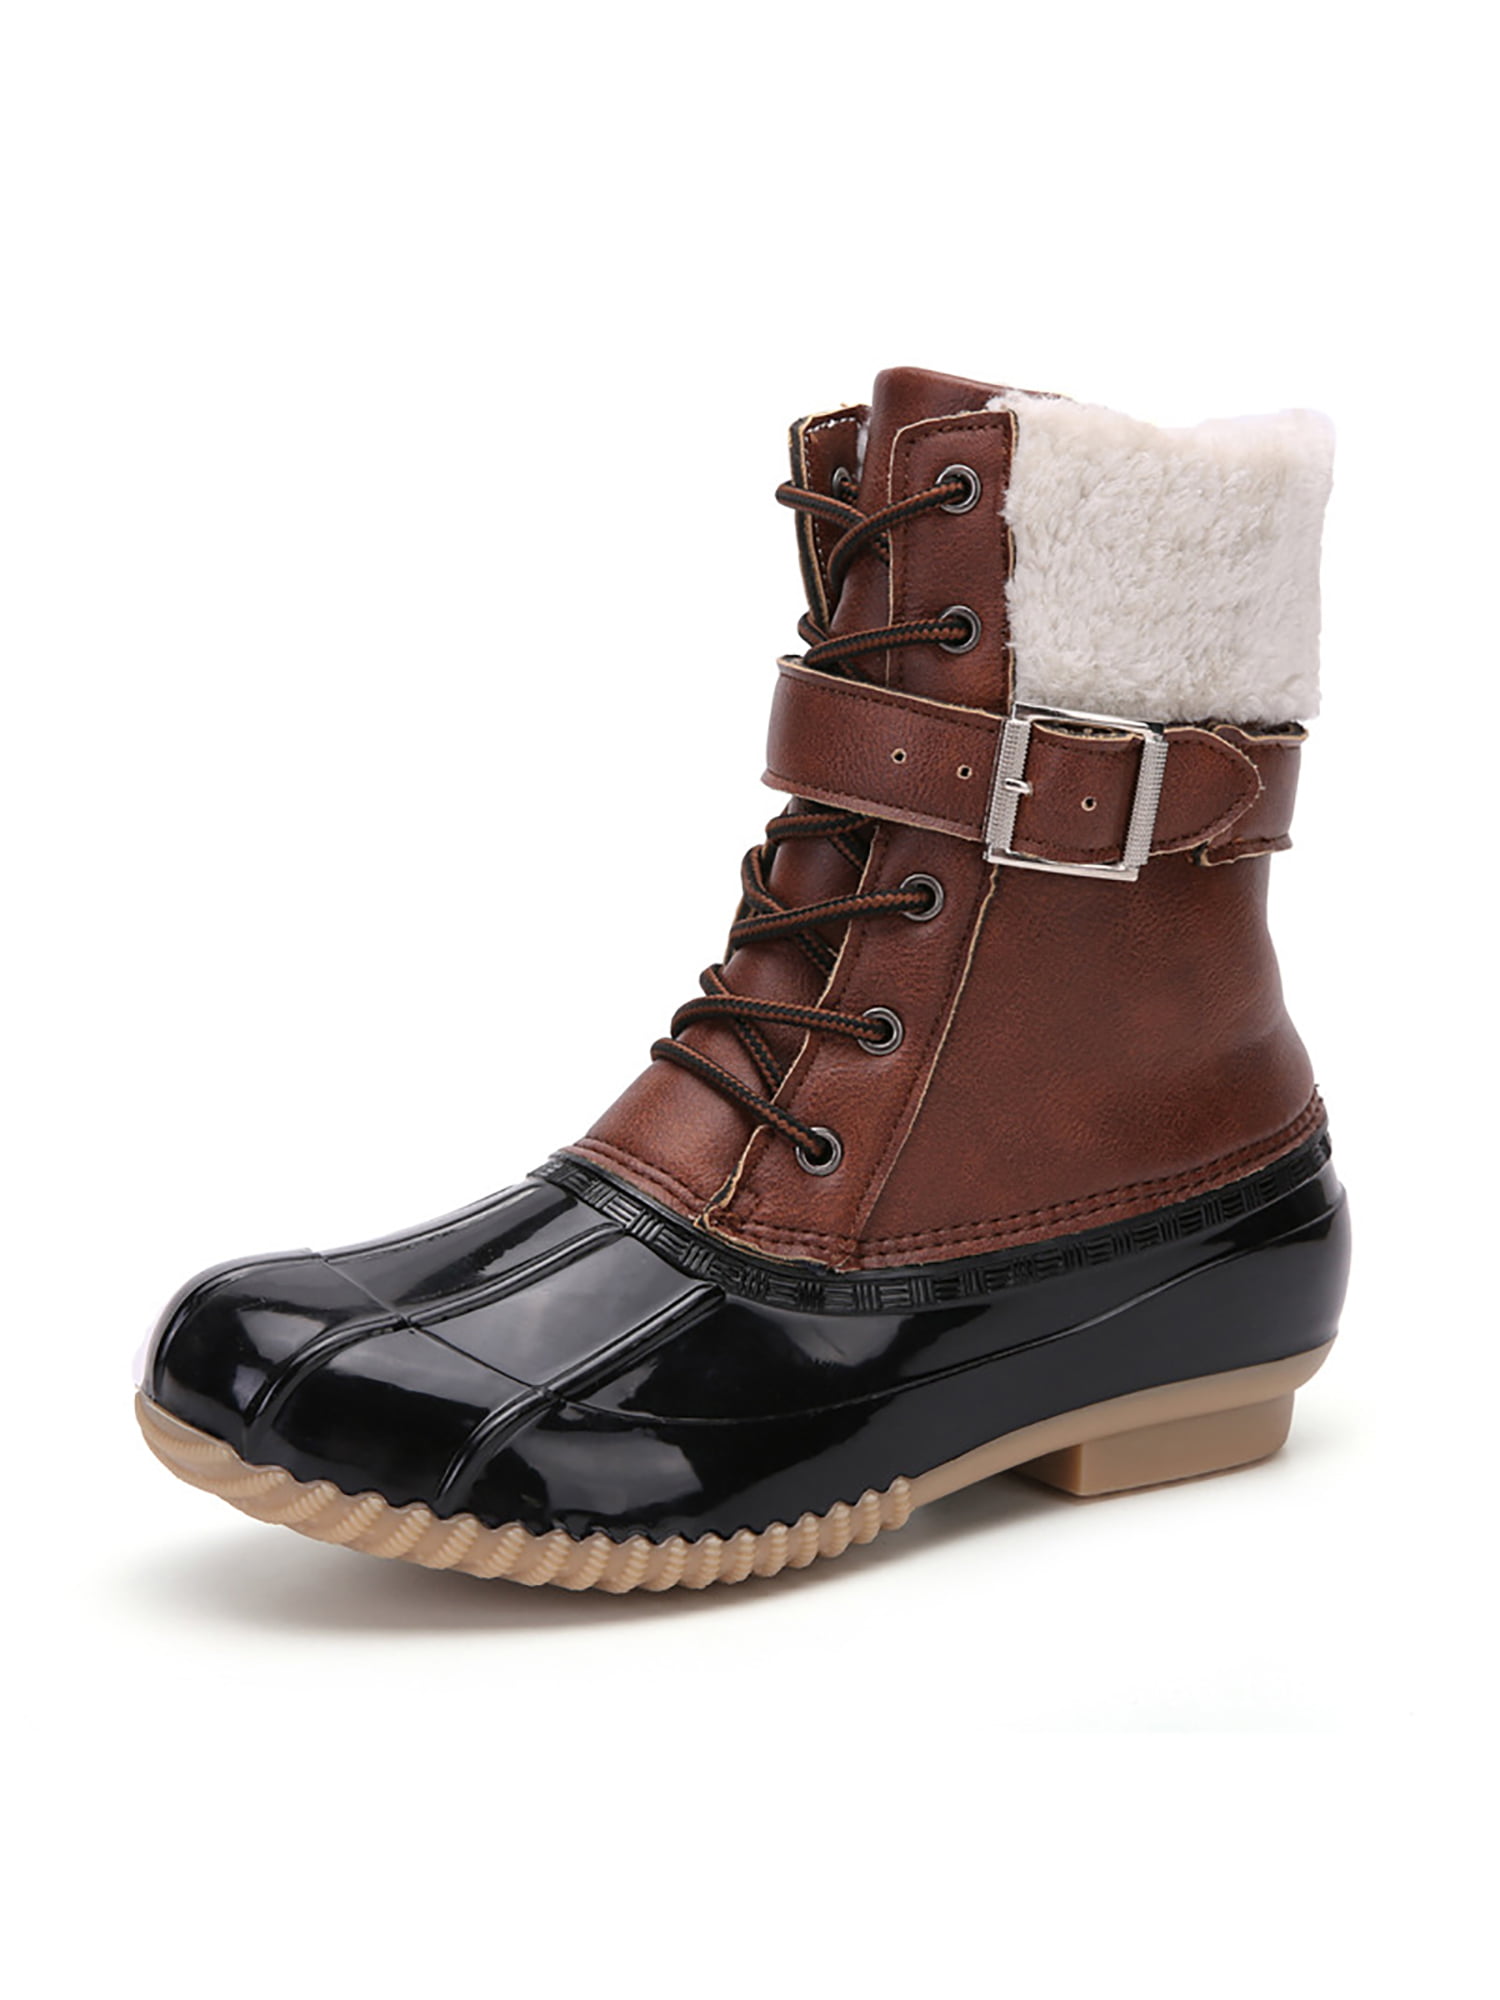 Women Ankle Muck Boots Ladies Stable Yard Front Lace Up Winter Warmth Snow Shoes 